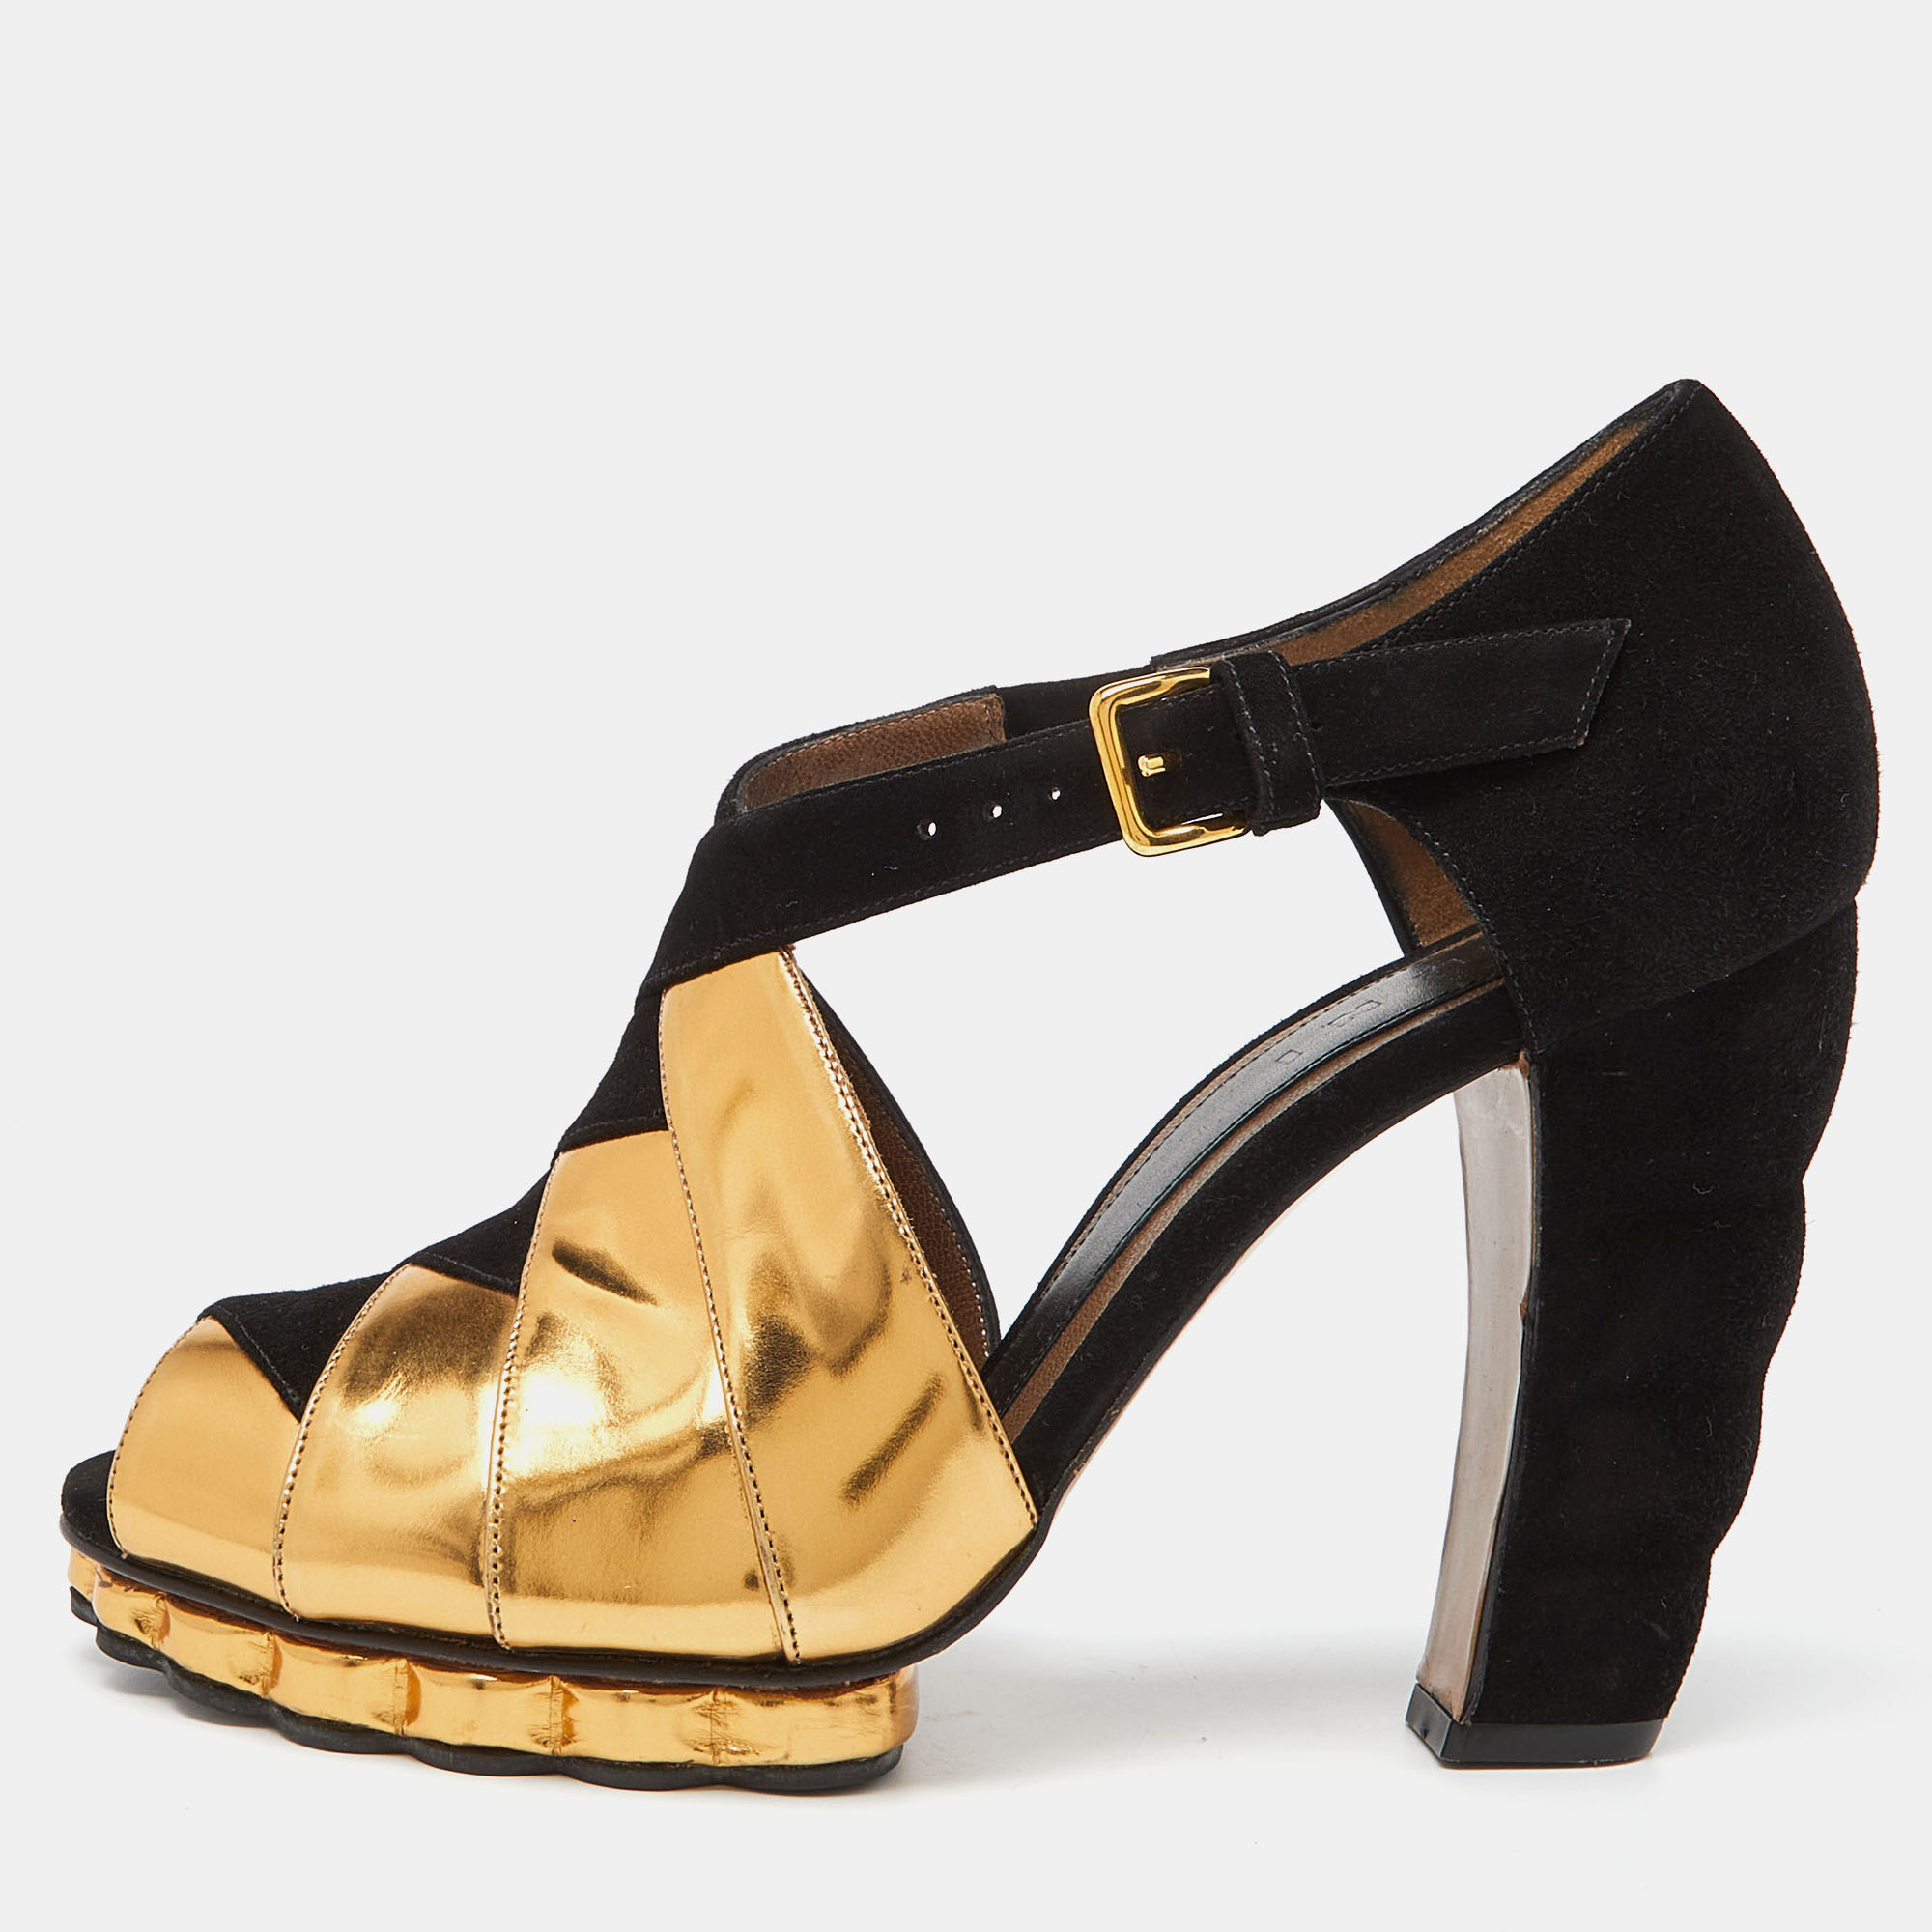 

Marni Black/Gold Suede and Leather Peep Toe Platform Sandals Size